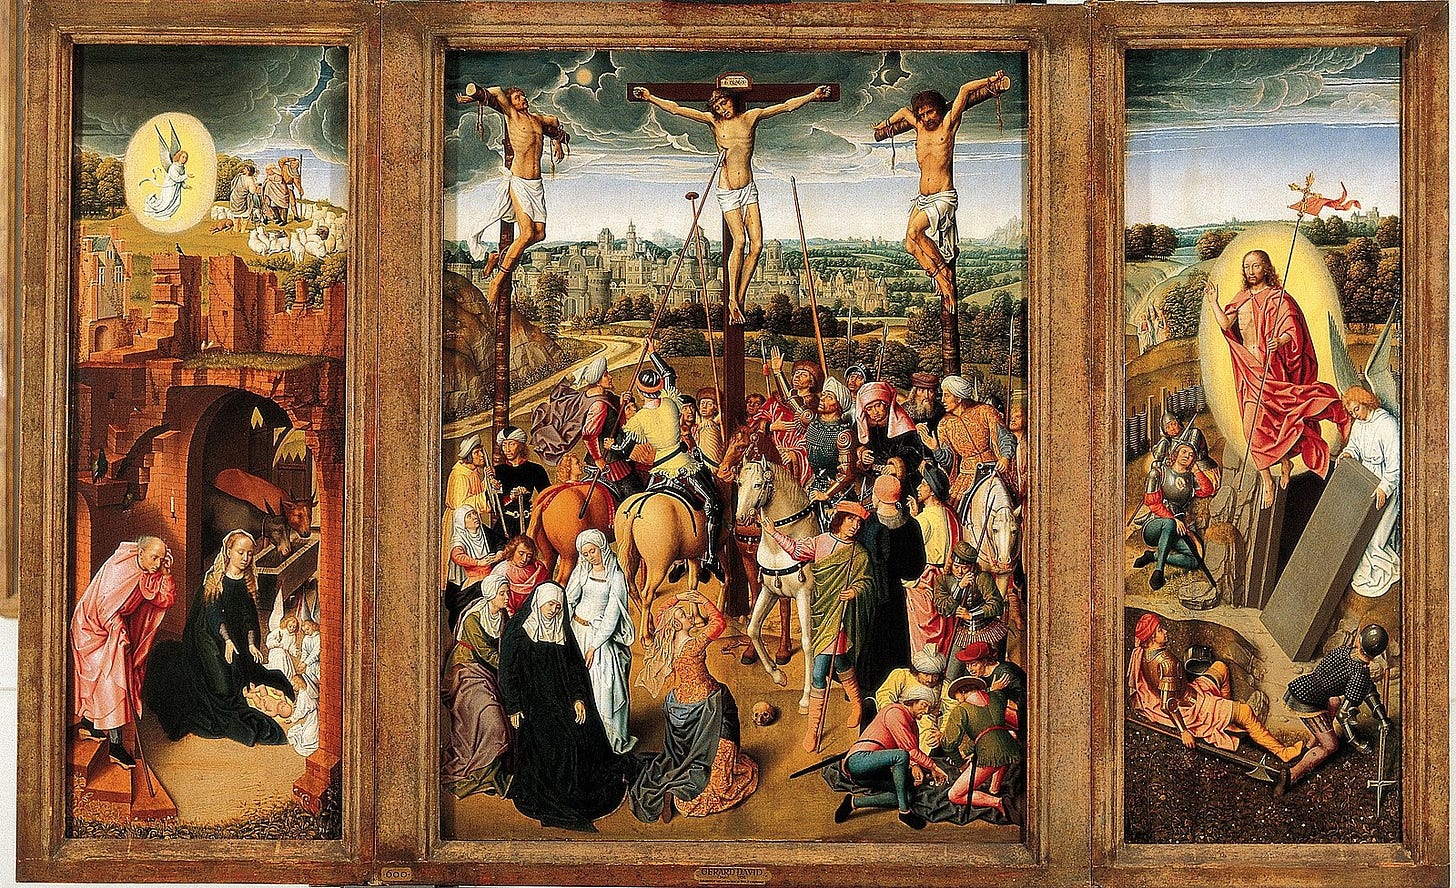 Crucifixion and Resurrection, follower of Hans Memling